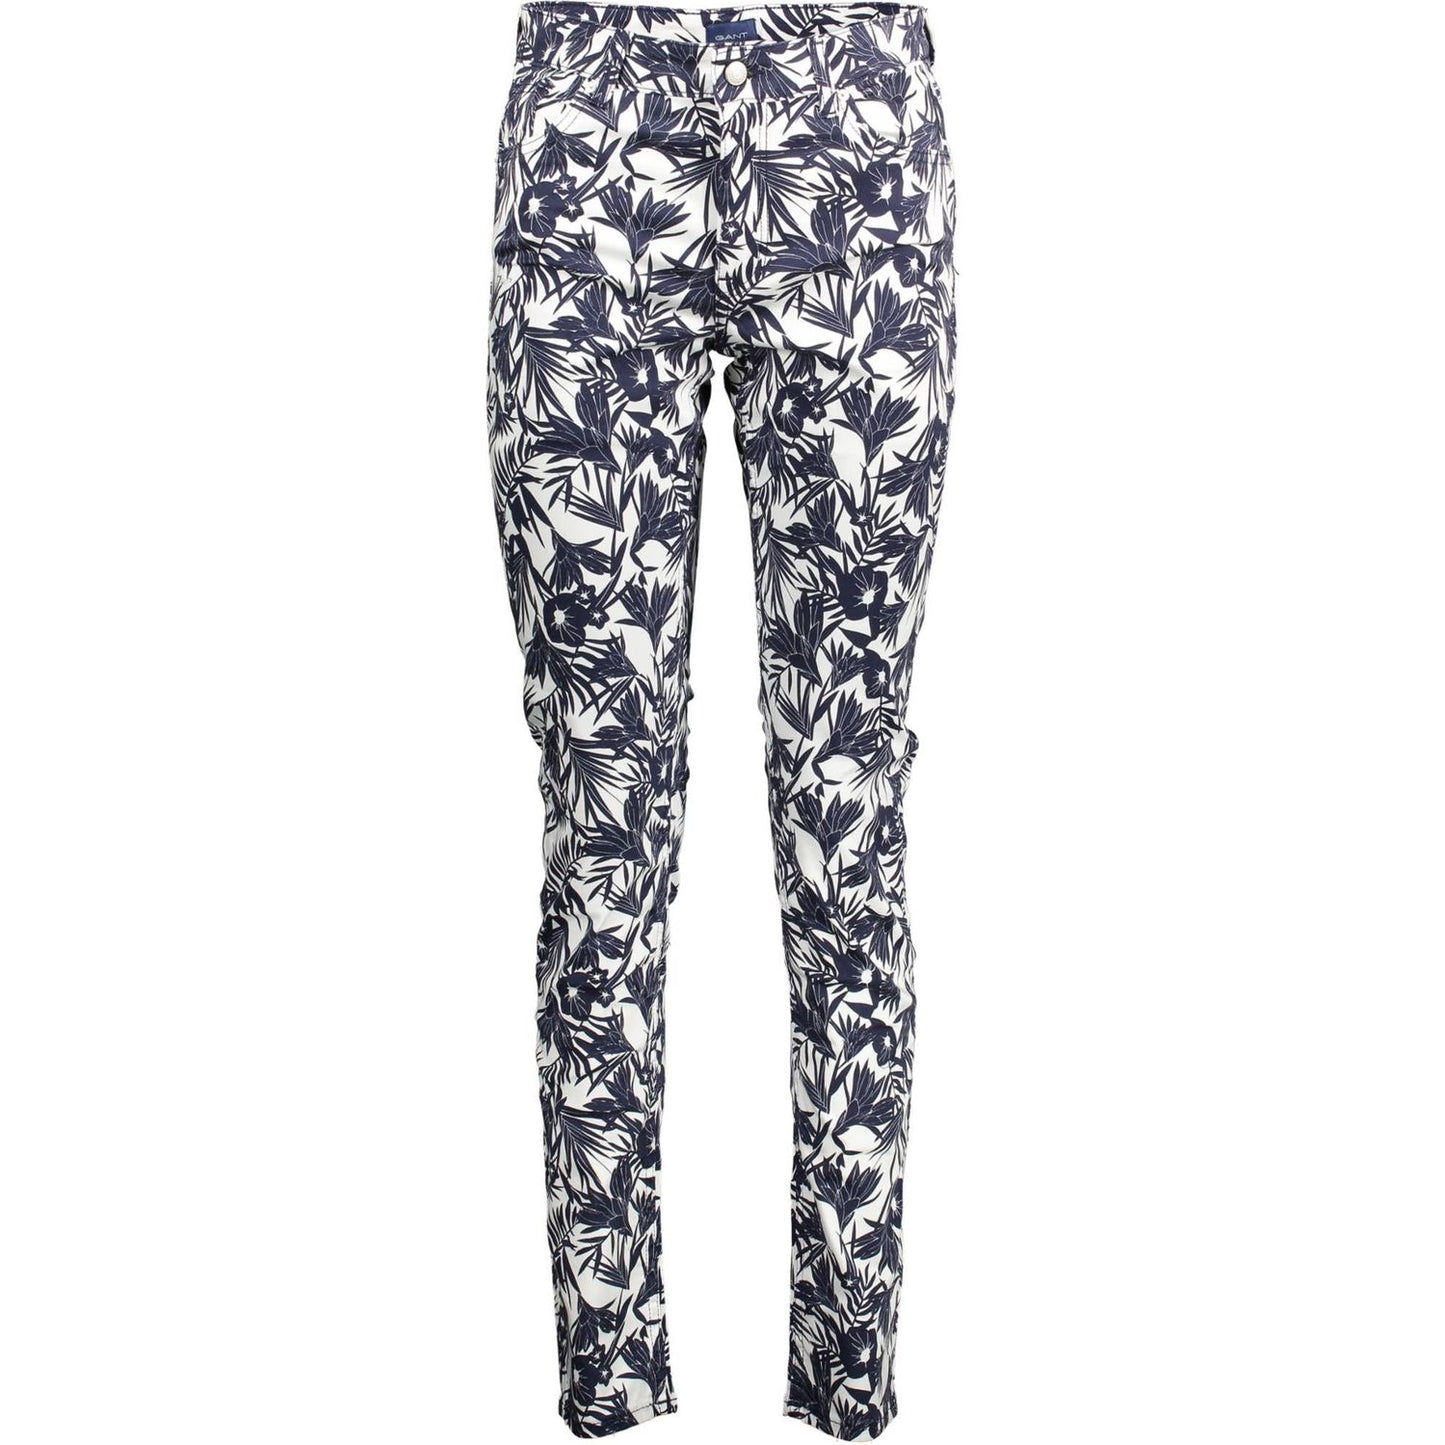 Chic Slim-Fit Organic Cotton Trousers